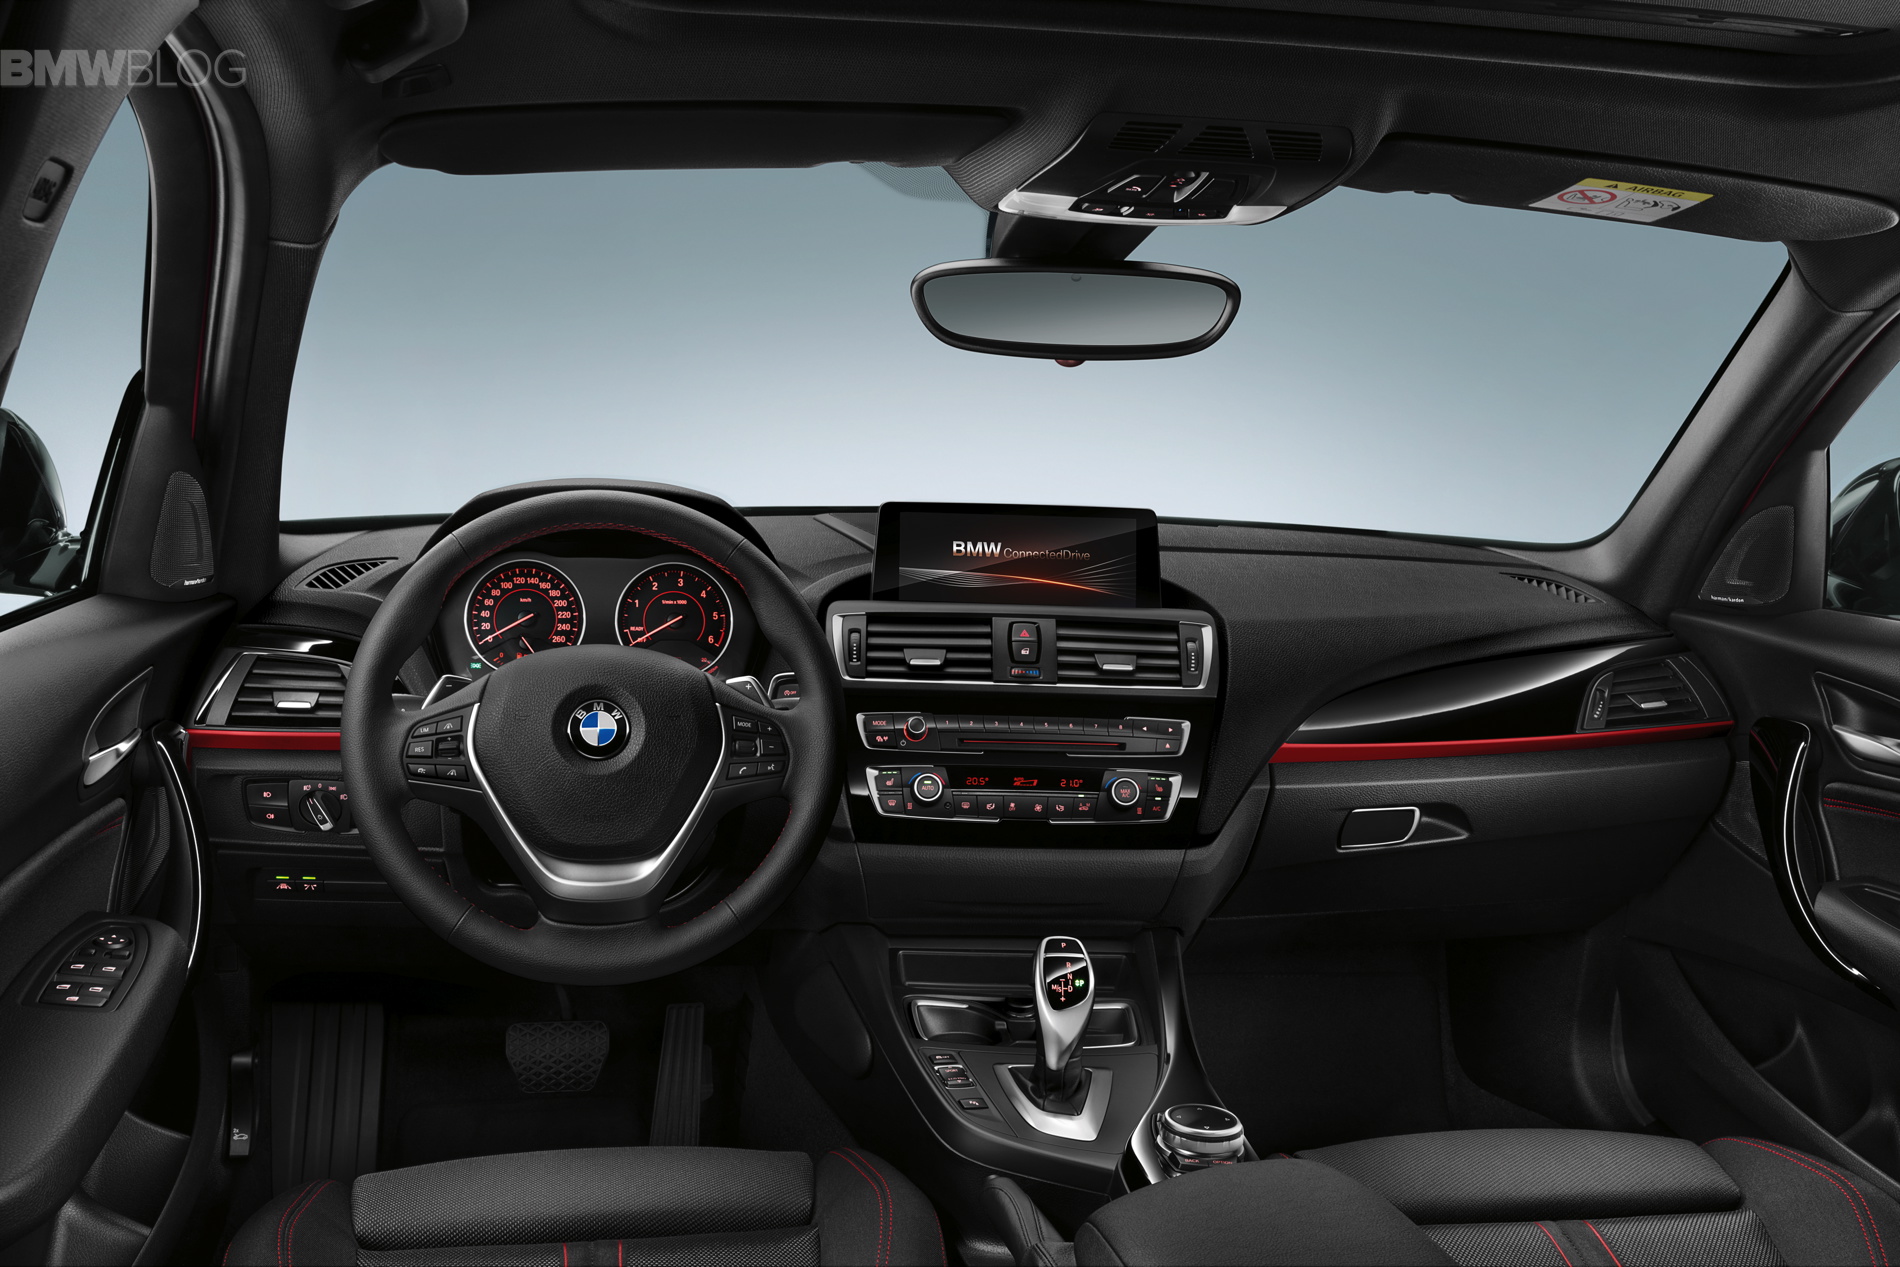 2015 BMW 1 Series Facelift with M Sport Package in Estoril Blue